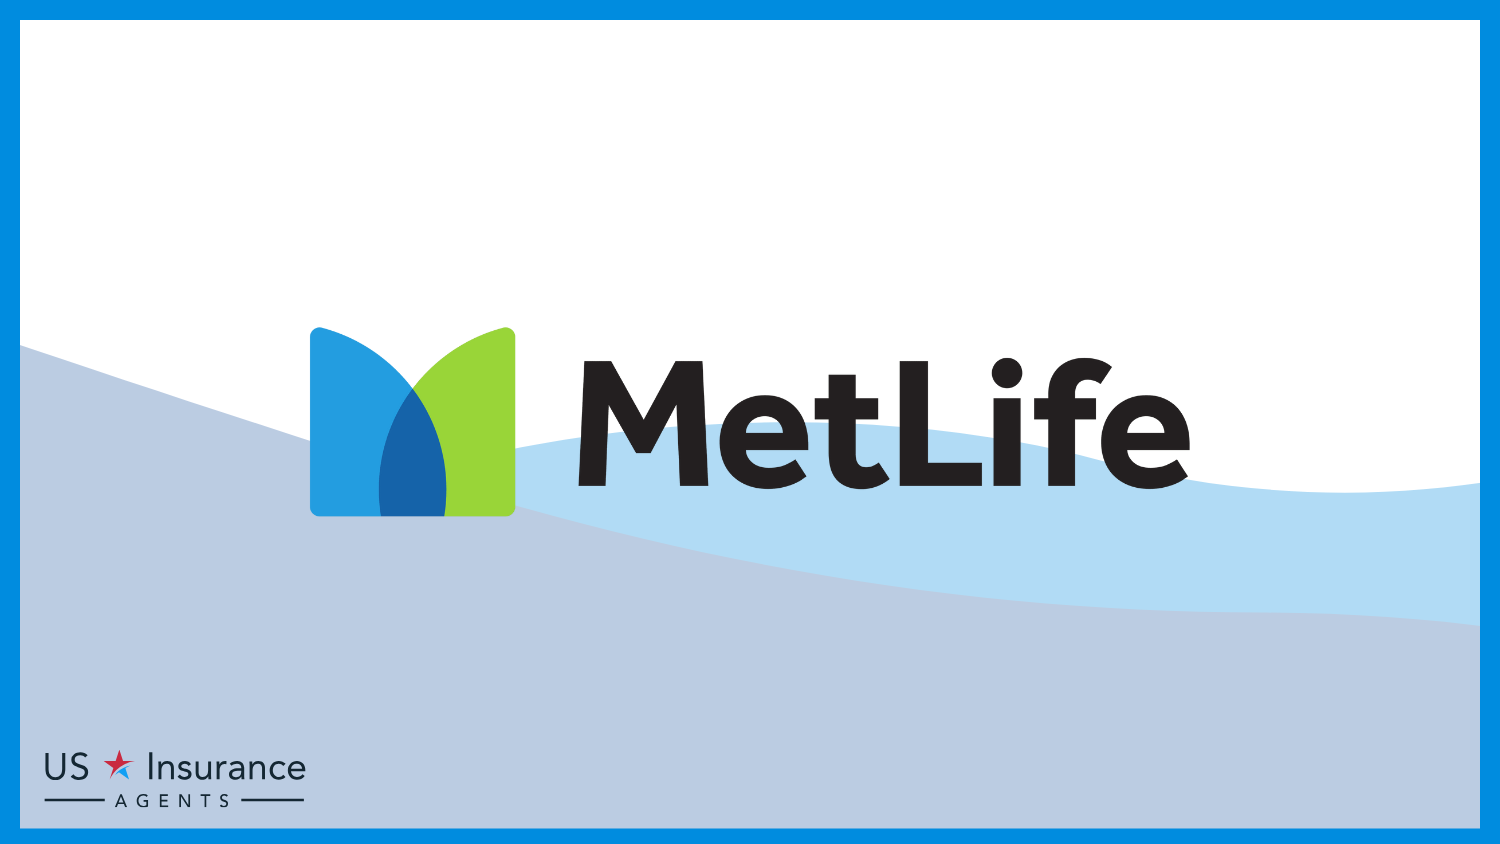 MetLife: Best Life Insurance for People With Cystic Fibrosis